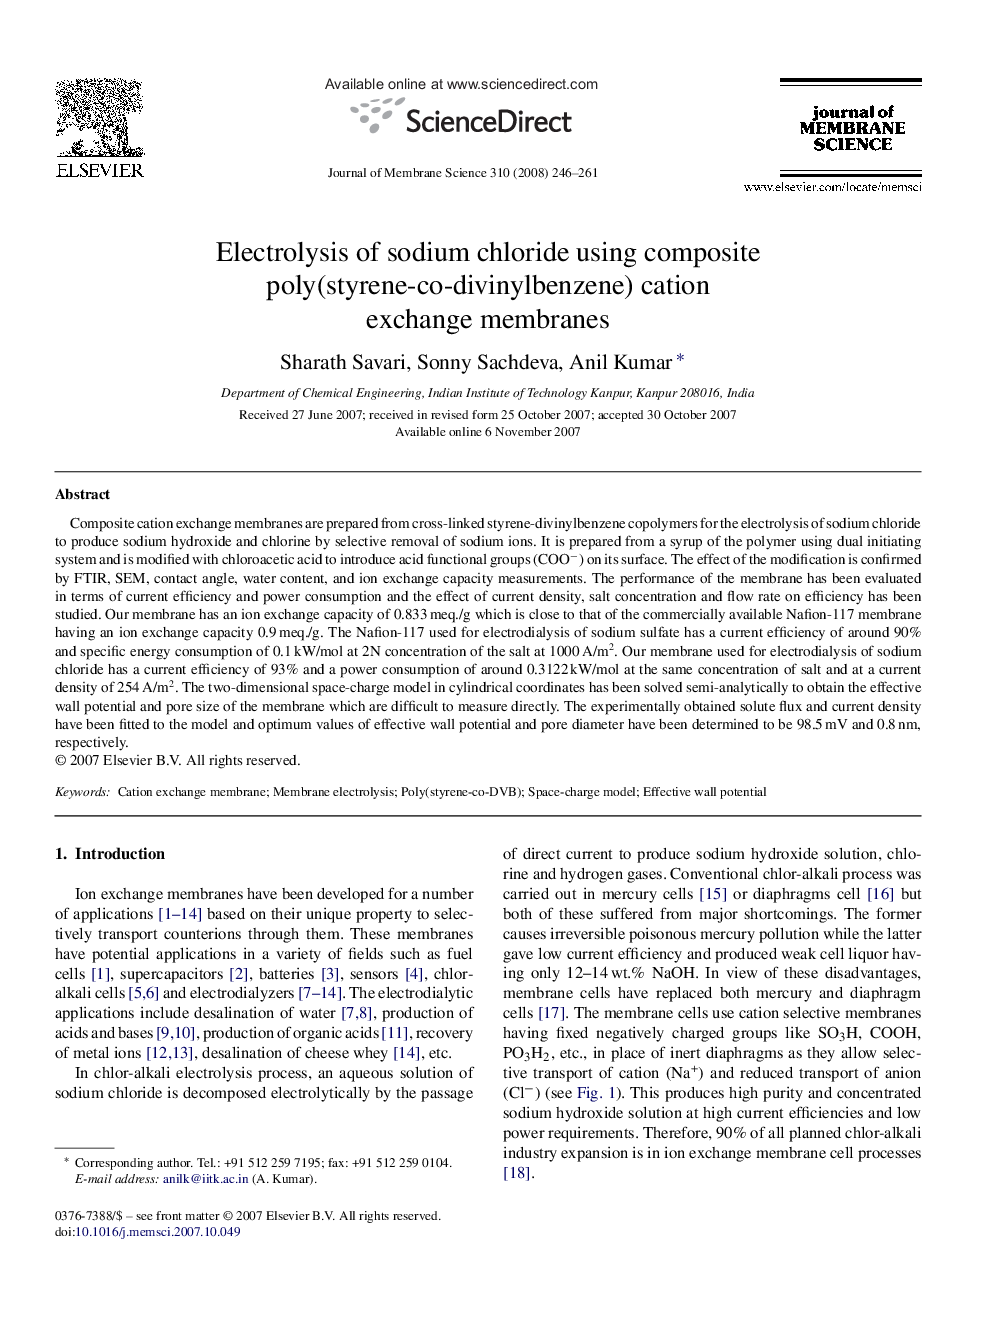 Electrolysis of sodium chloride using composite poly(styrene-co-divinylbenzene) cation exchange membranes